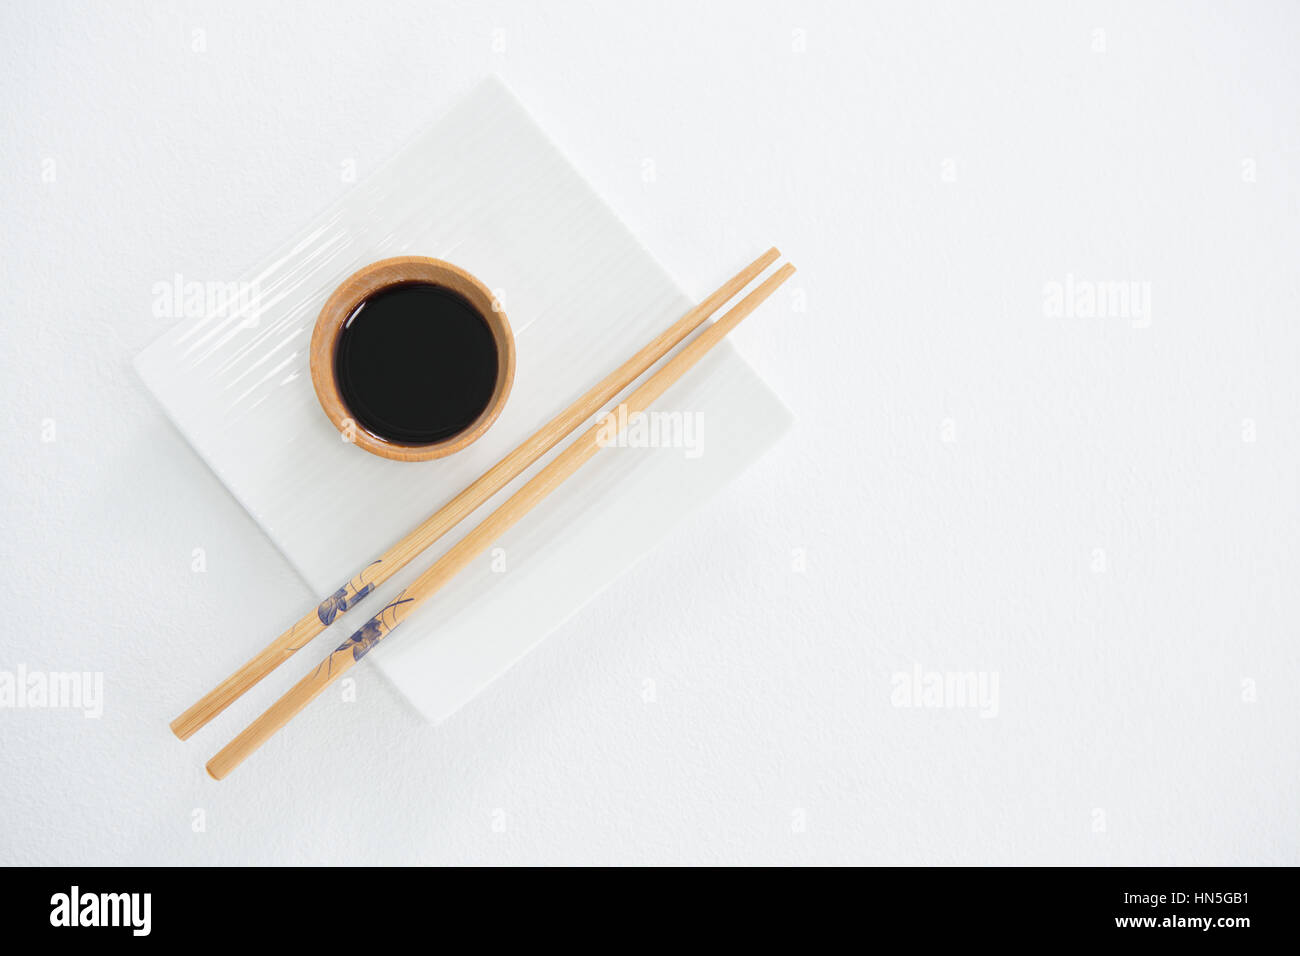 Chopstick and soy sauce on white plate against white background Stock Photo